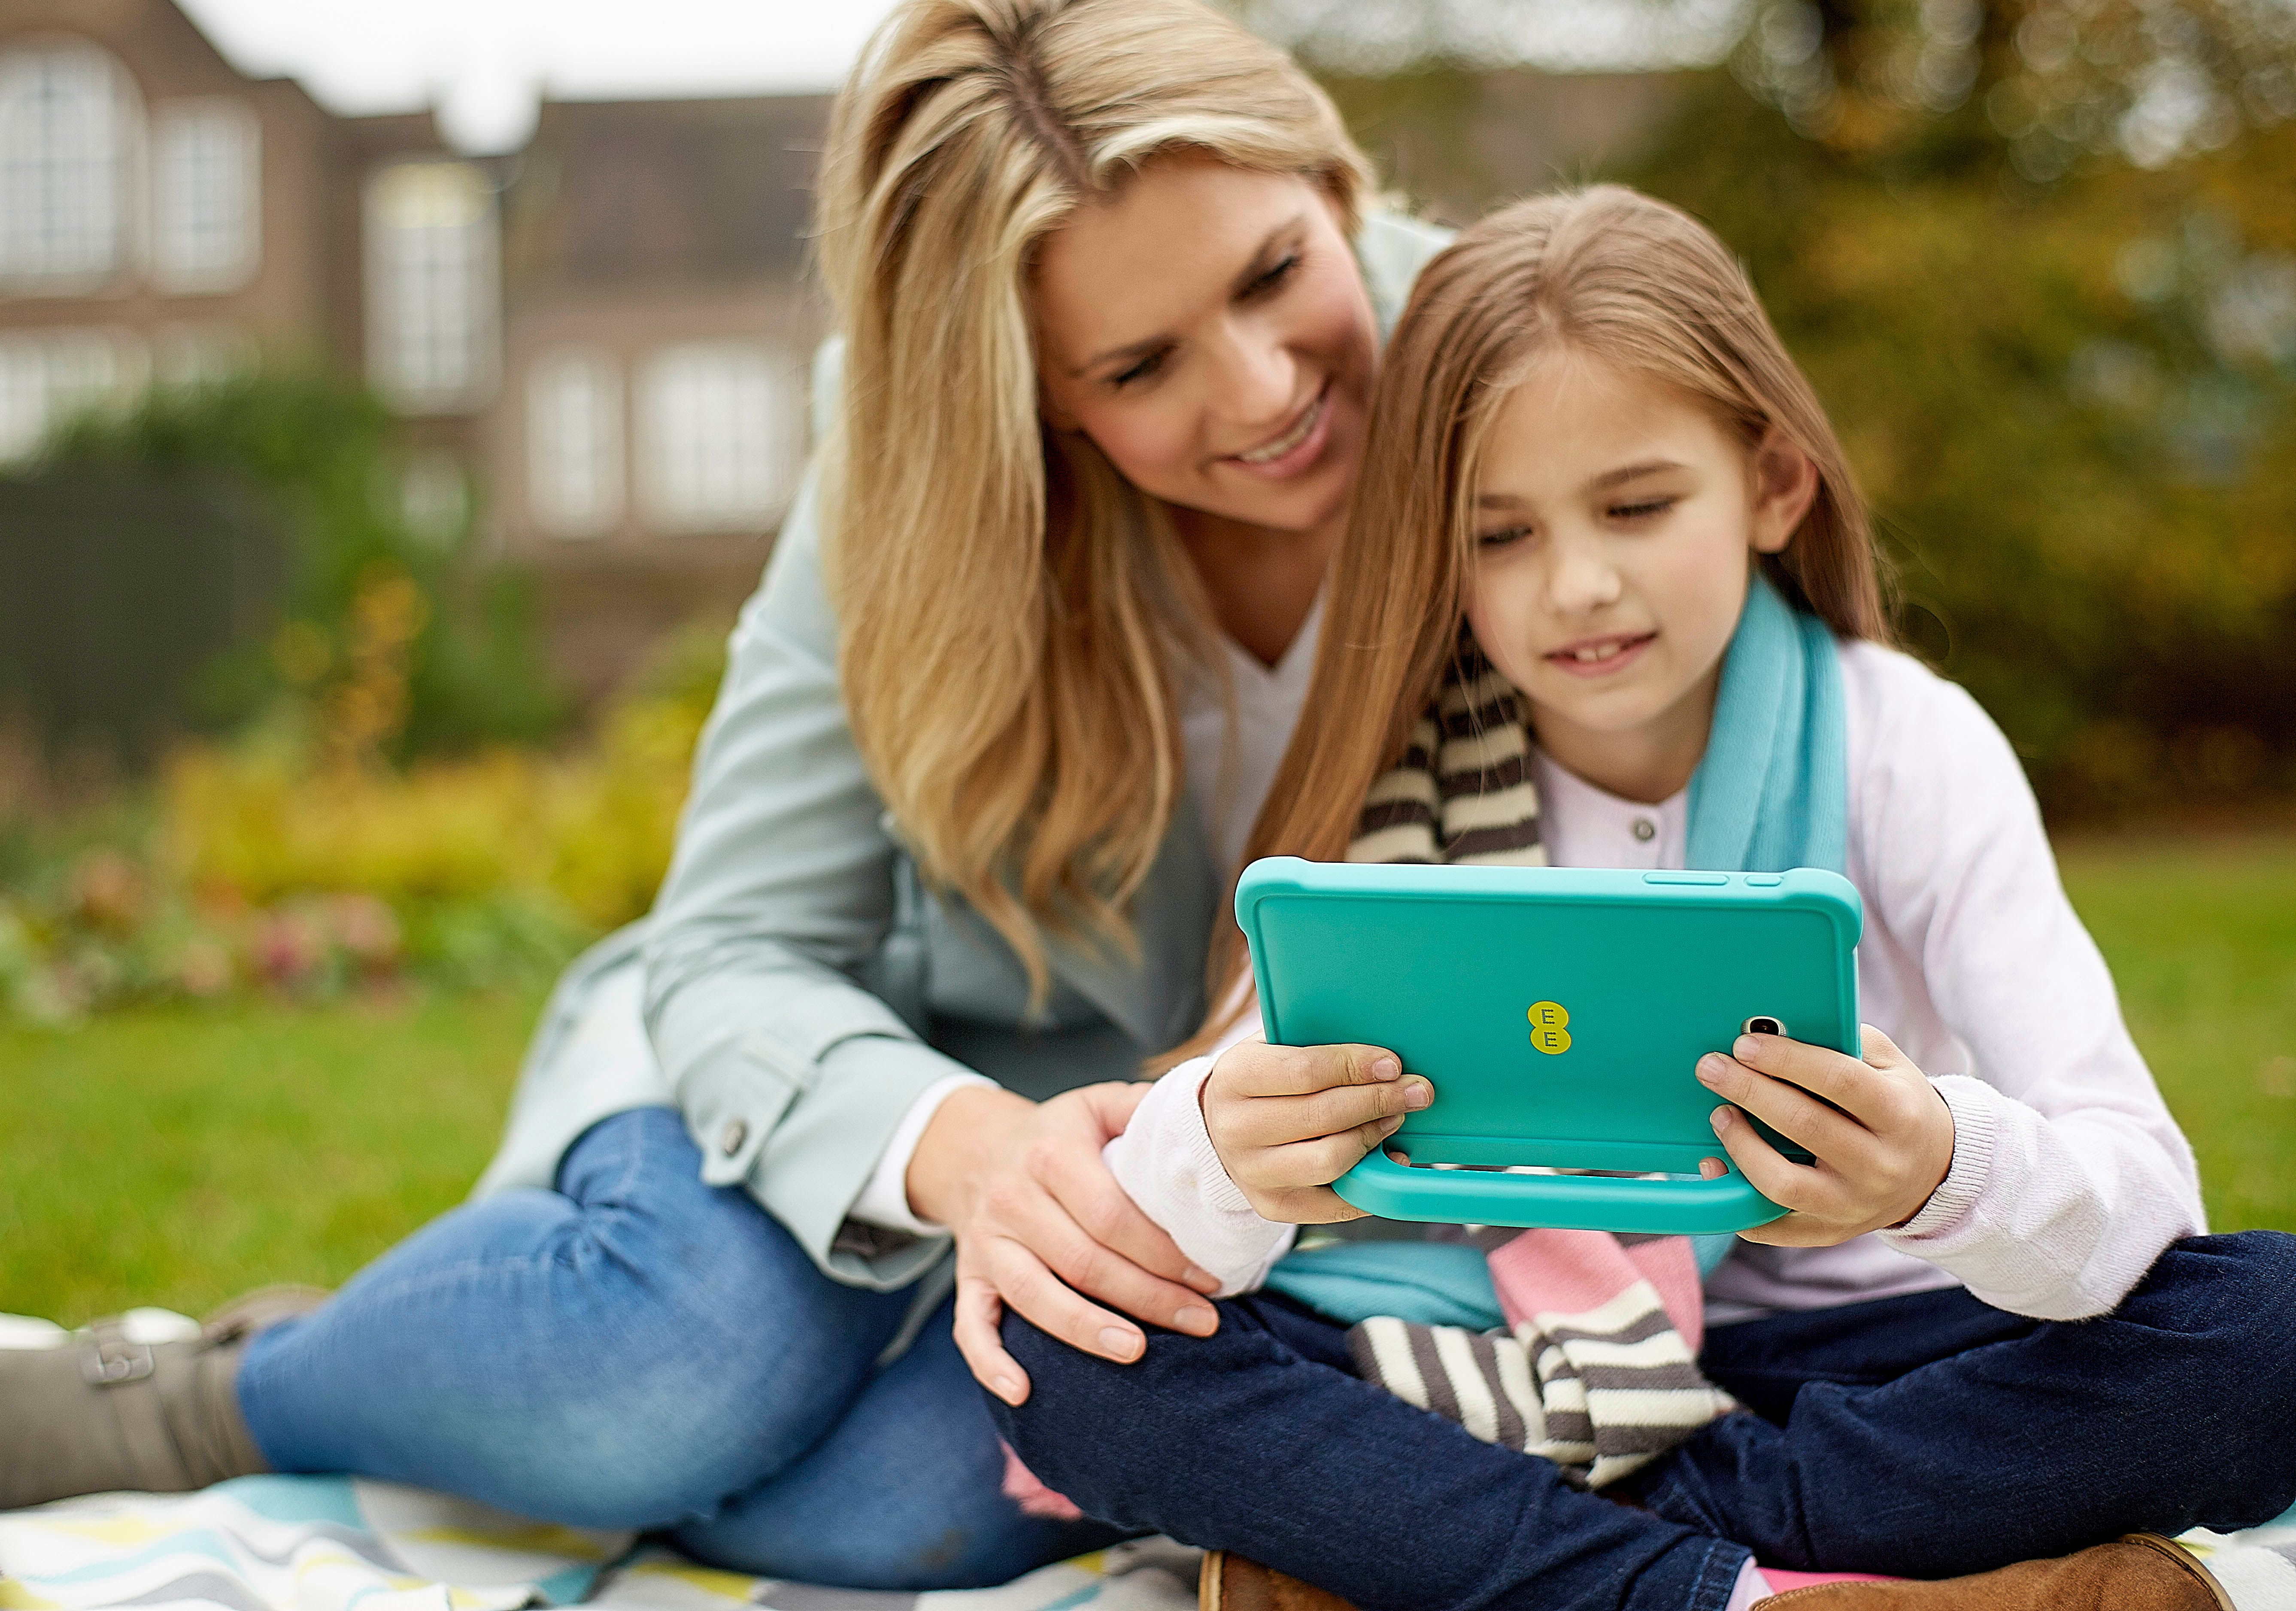 ee launches second gen robin tablet designed specifically for kids image 1